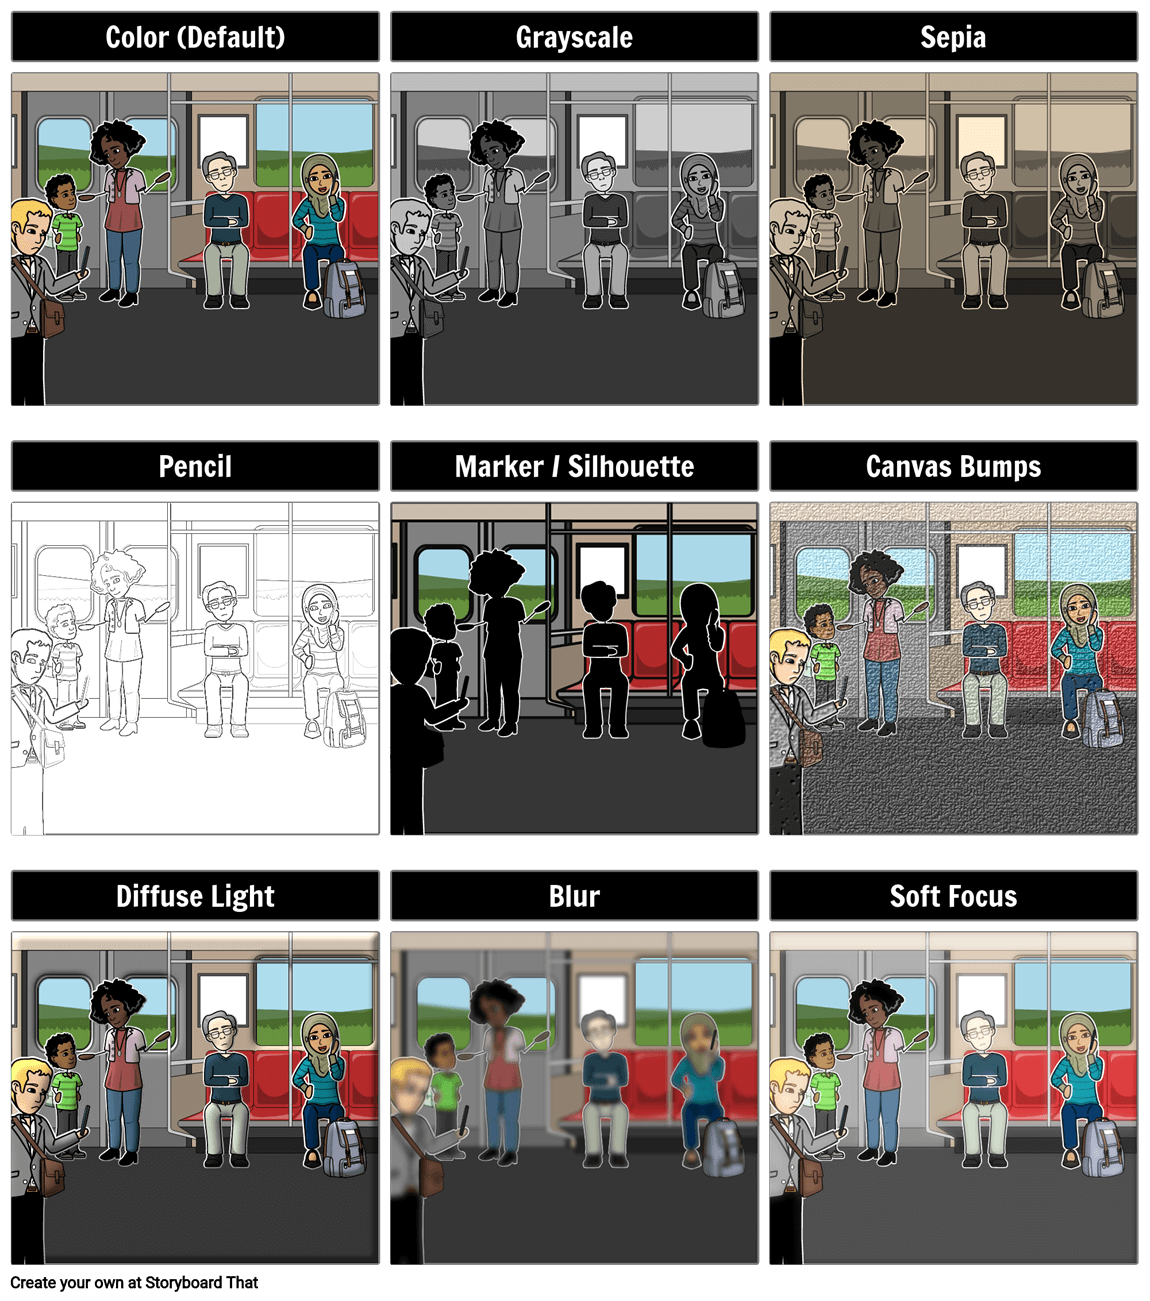 Using filters in storyboard software